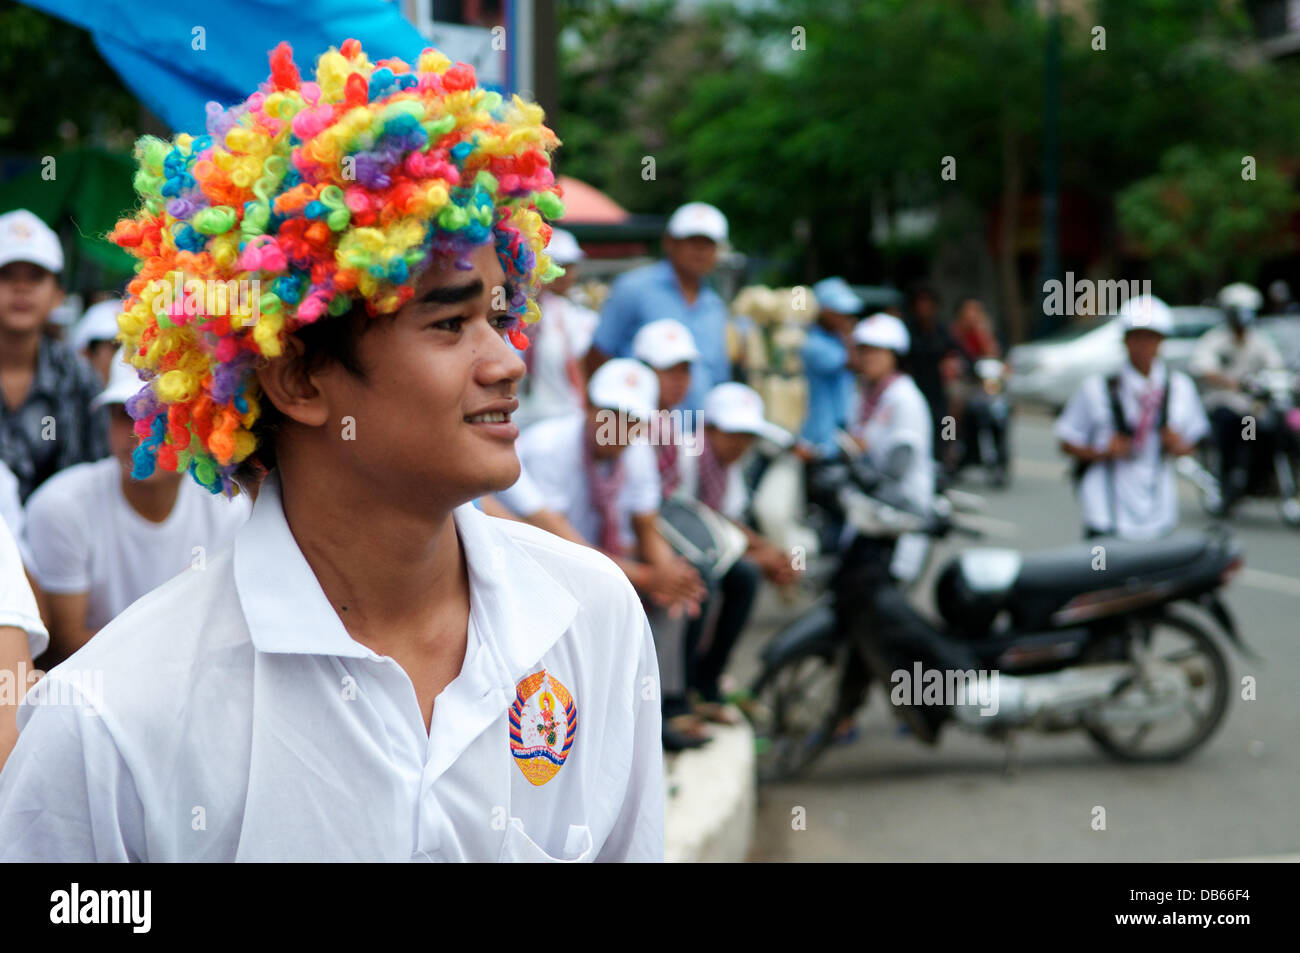 Phnom Penh, Cambodia on July 24th, 2013. Hun Sen supporter wearing colorful wig. Hun Sen is the current Prime minister of Cambodia & has been ruling for the last 28 years. Credit:  Kraig Lieb / Alamy Live News Stock Photo